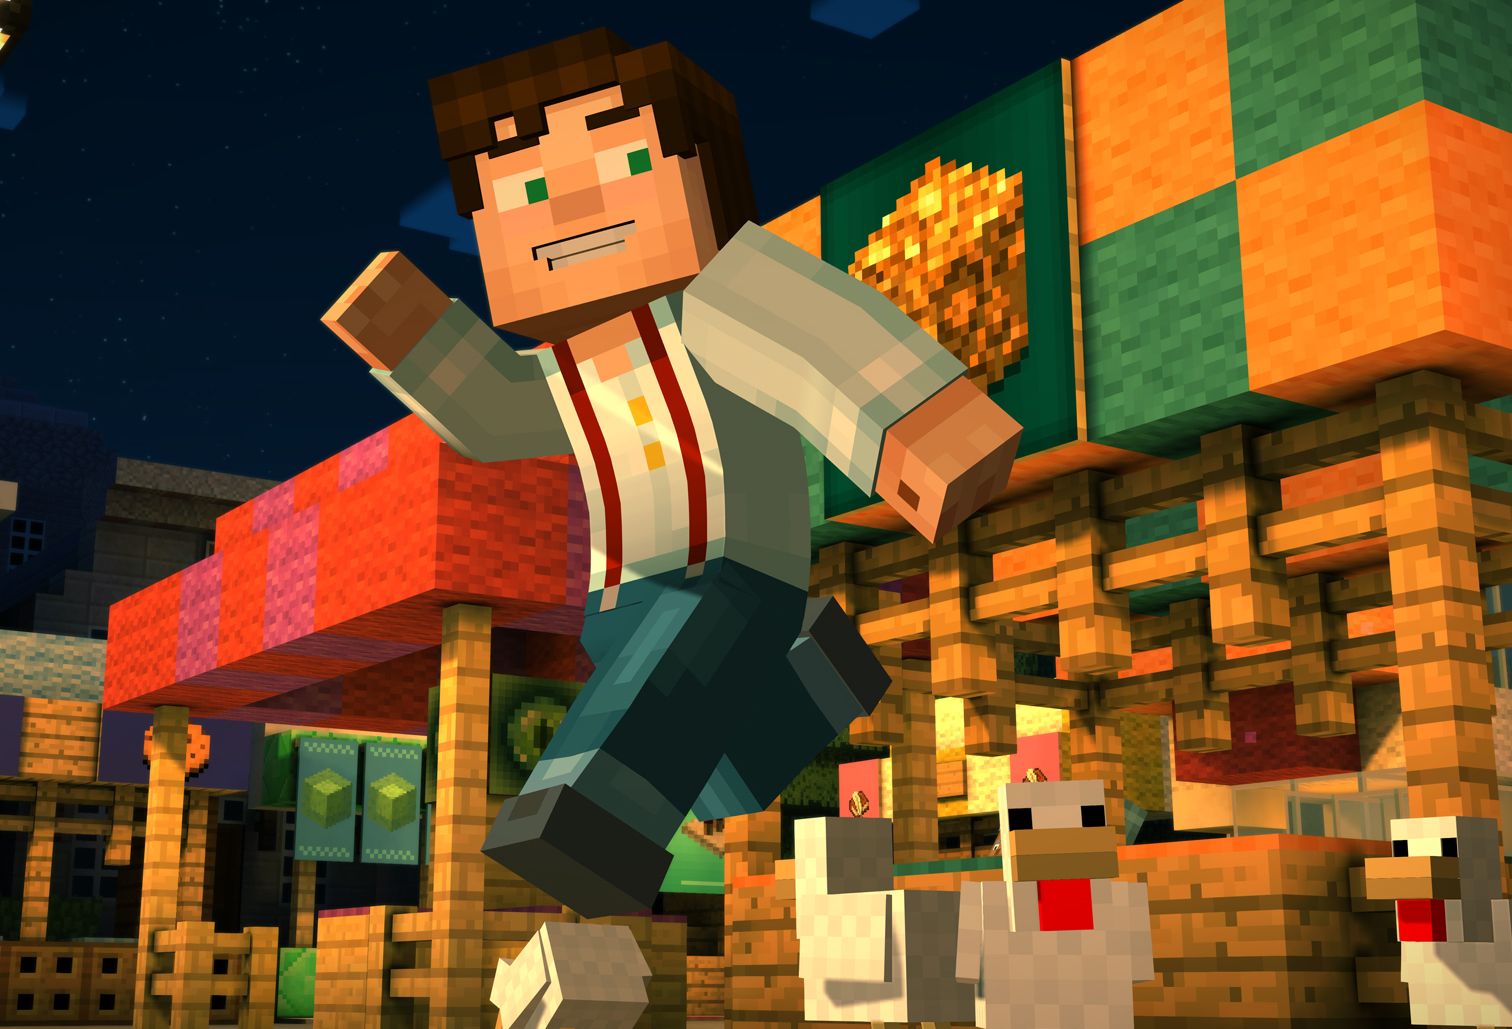 Minecraft is getting a proper retail Xbox One release with tons of DLC